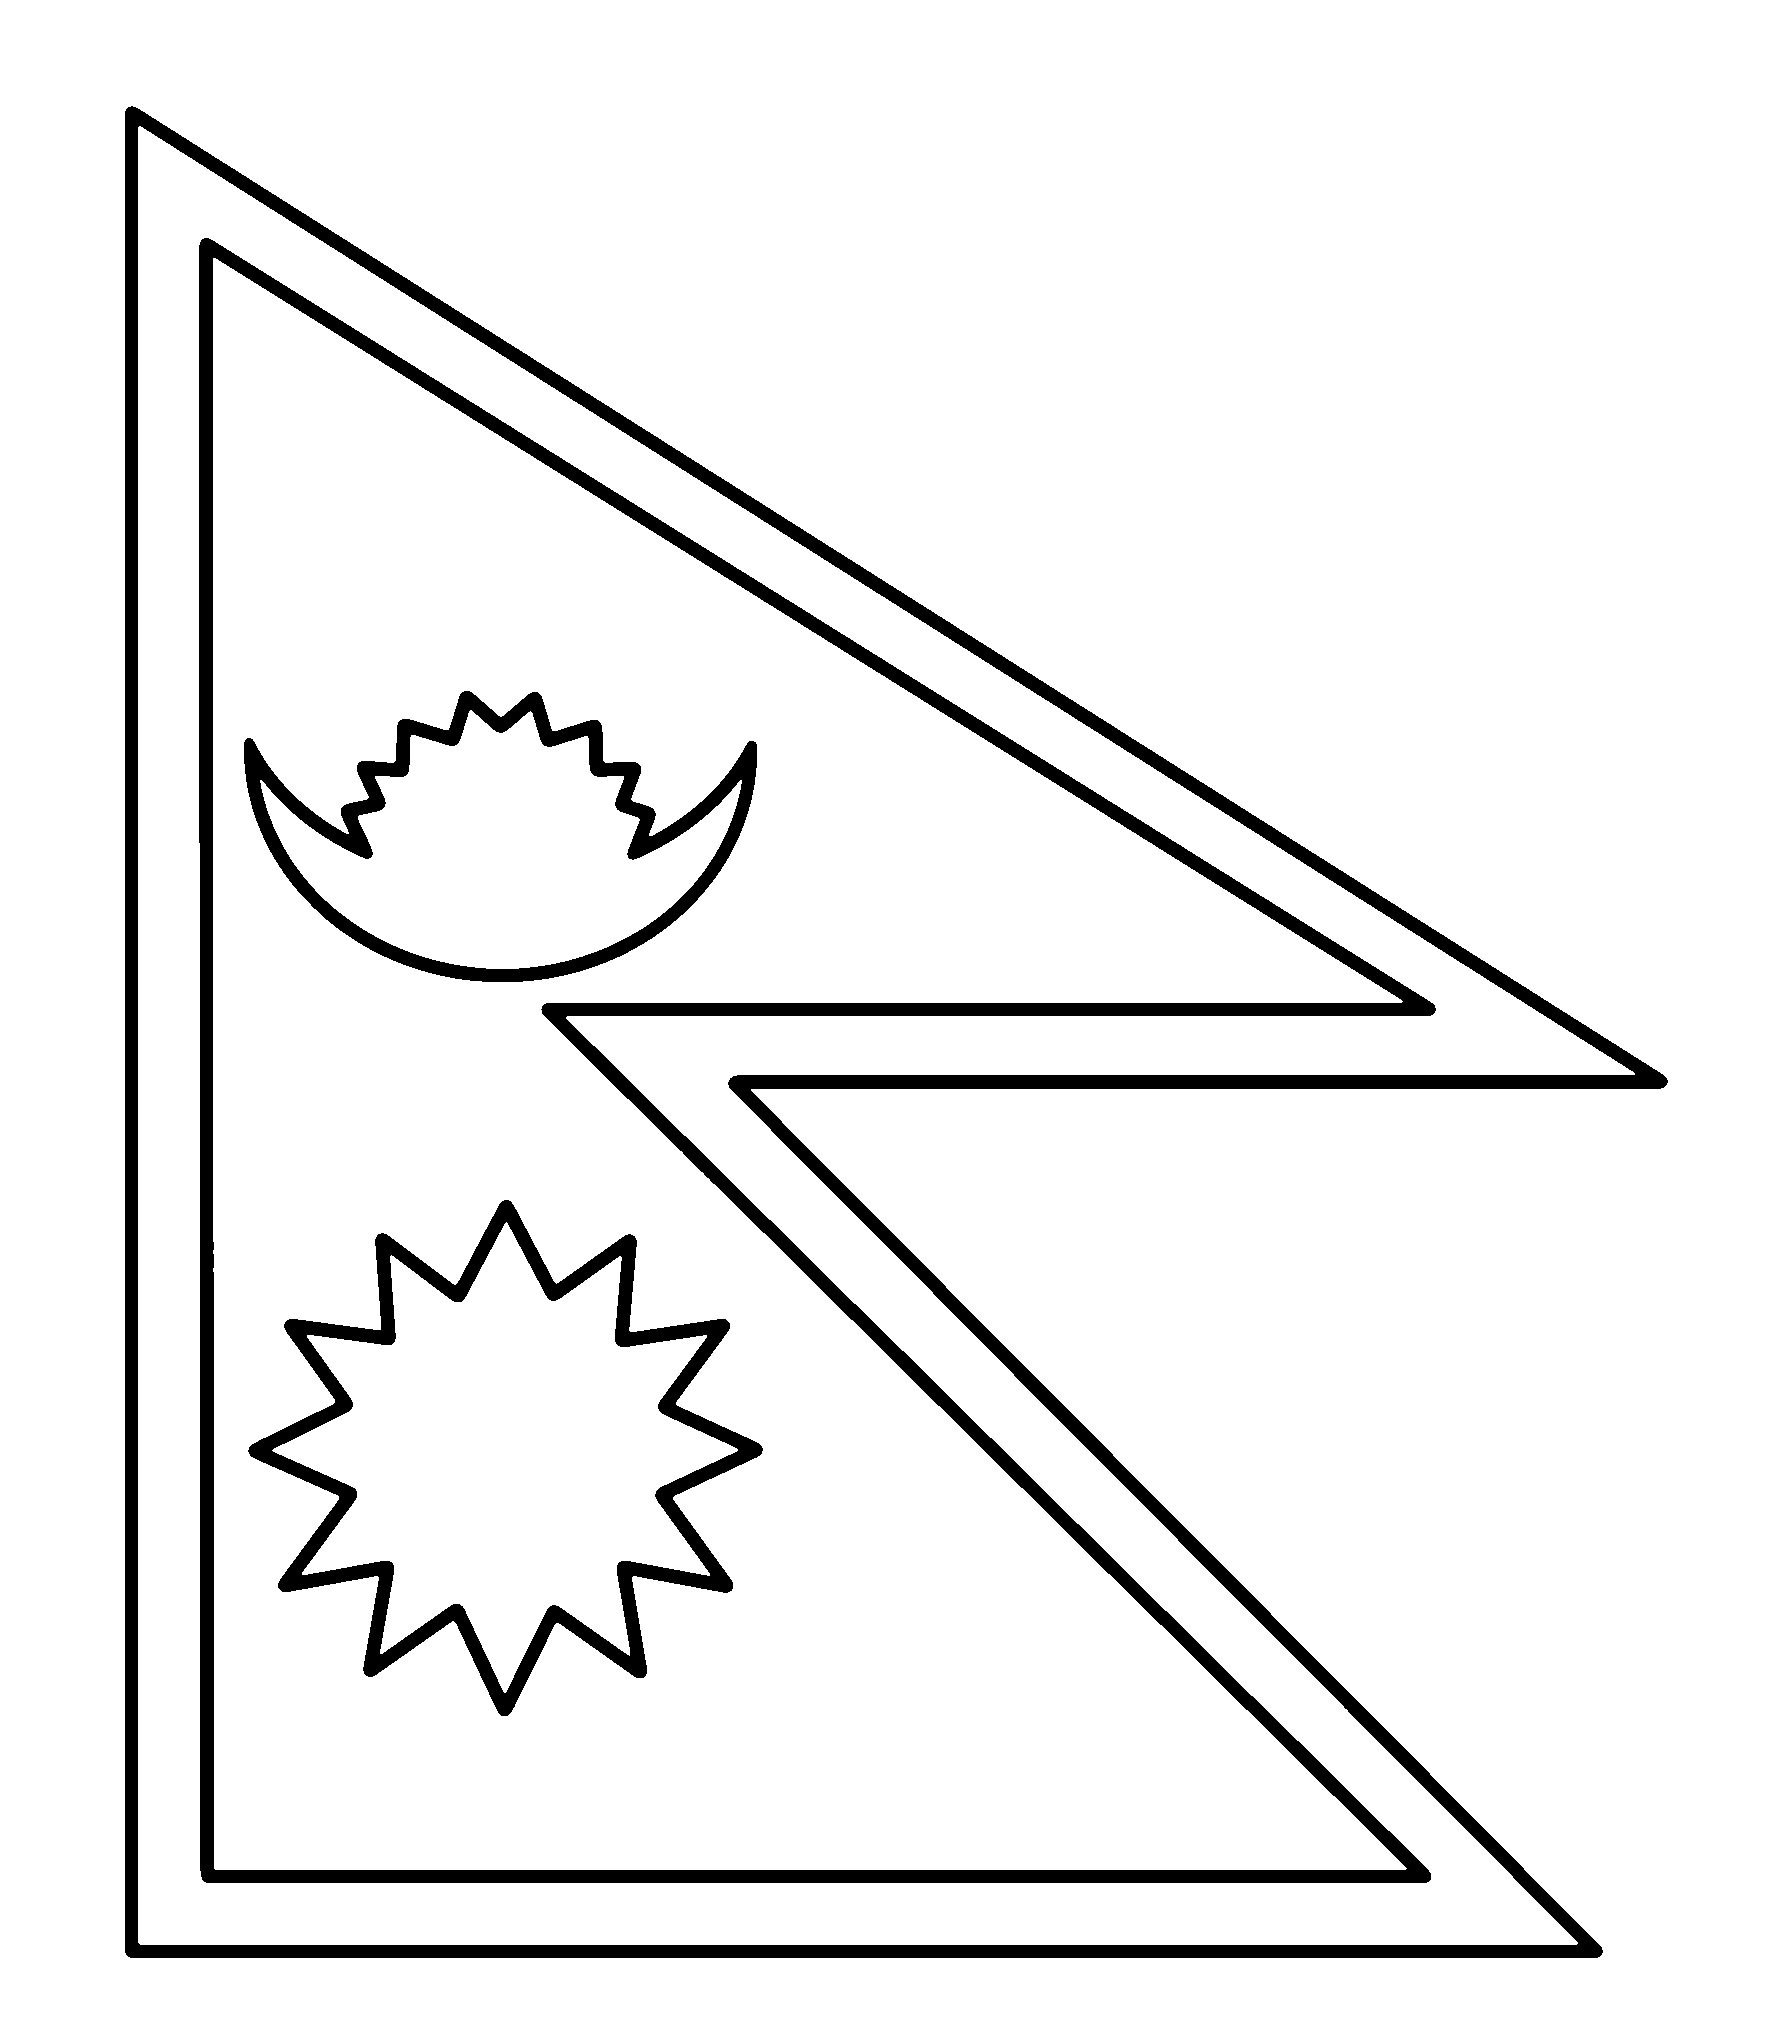 Flag of Nepal Outline drawing. Nepal flag